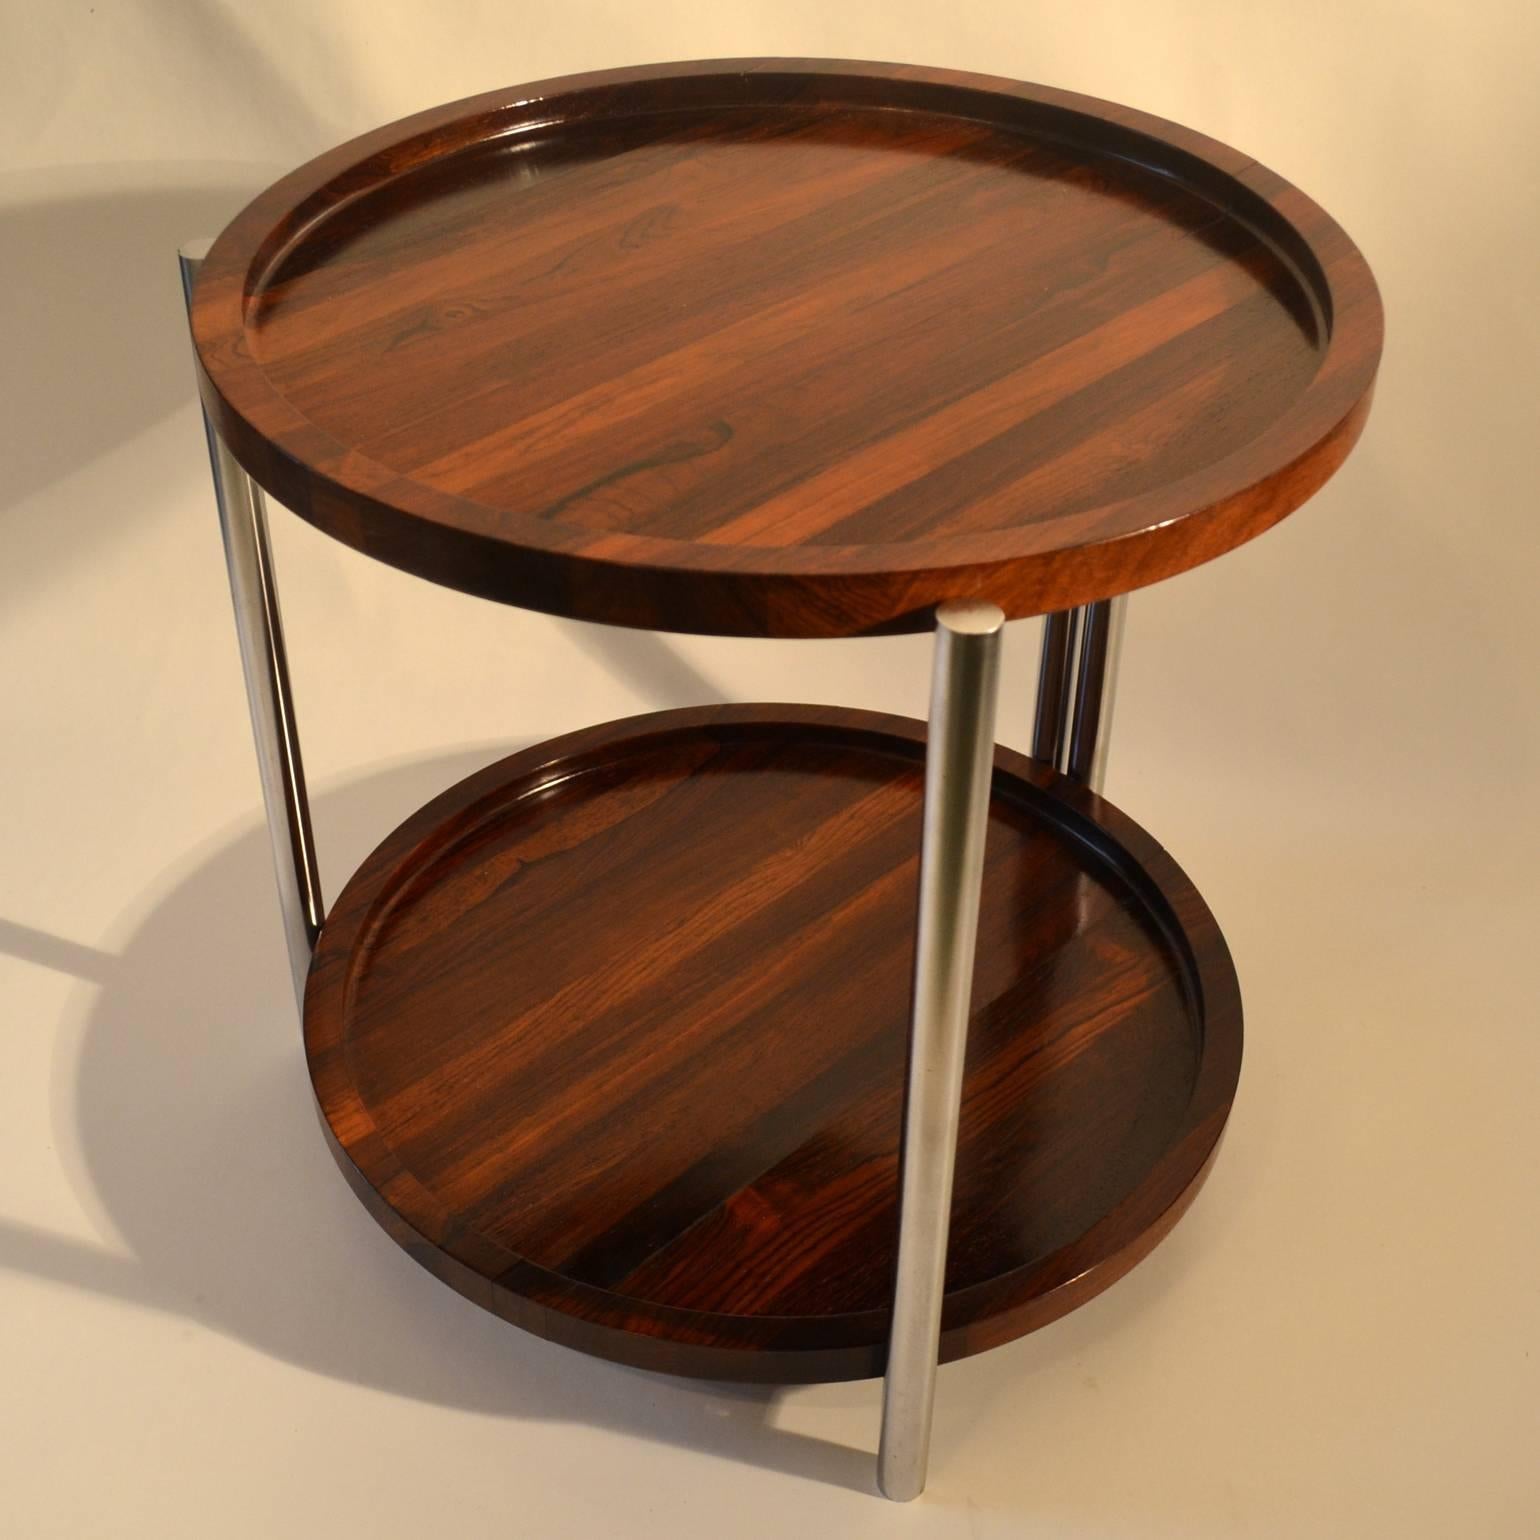 Two level cocktail or side table with two hand carved round wooden trays in Brazilian Ironwood  on a foldable stainless steel frame. Ideal as a serving table for cocktail parties and easy to move around the room. This occasional table can be flat